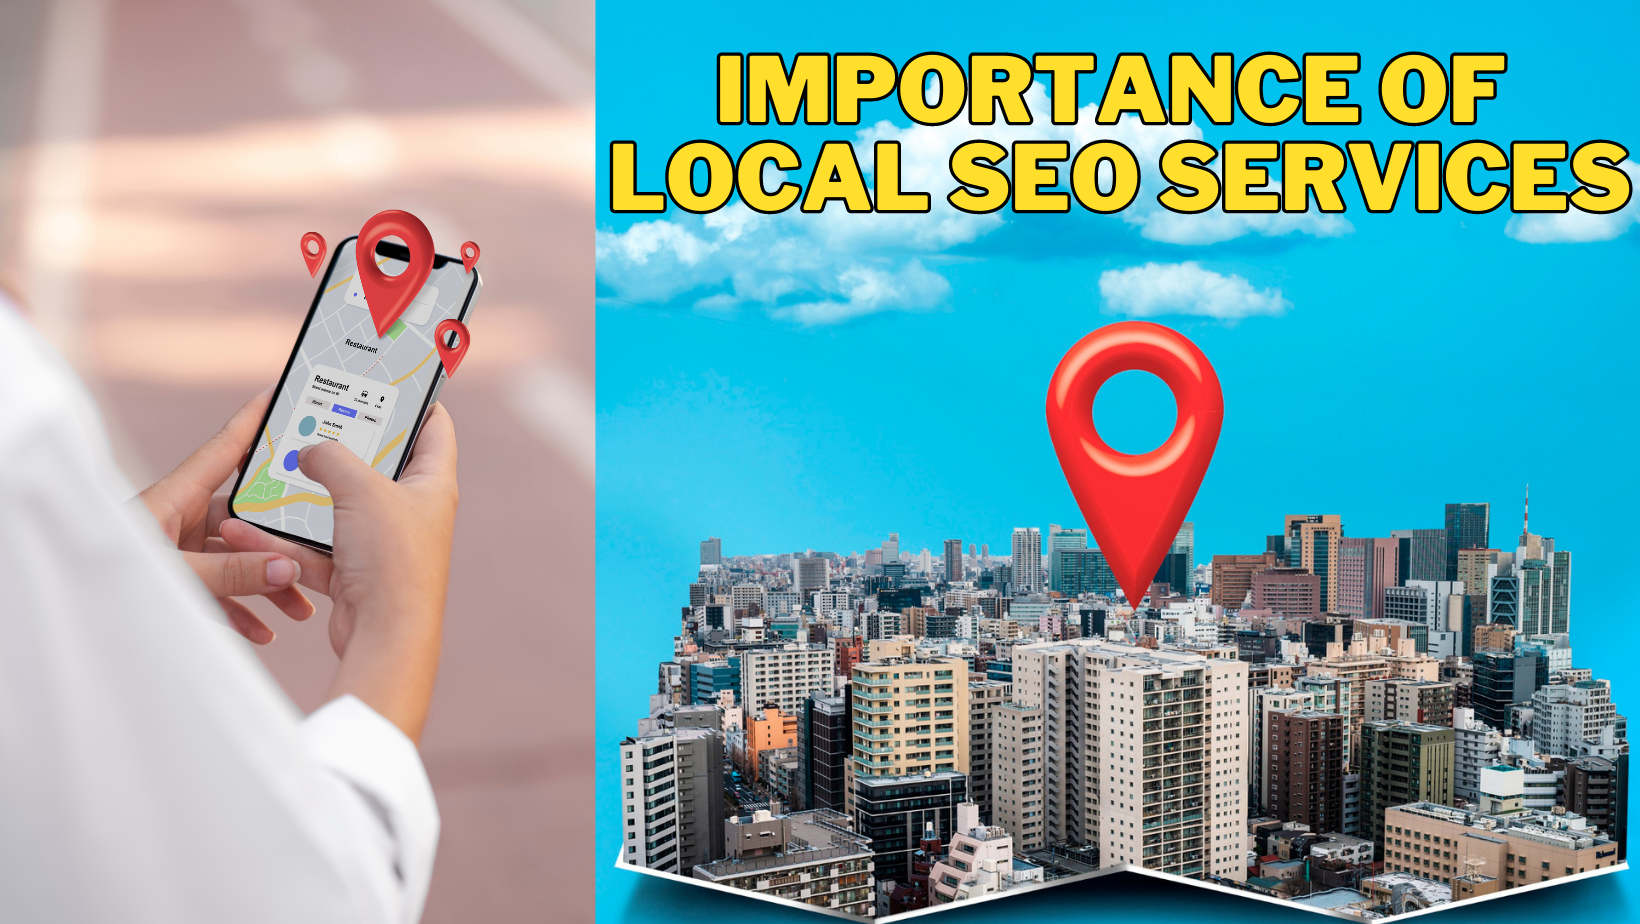 What is the importance of local SEO services for small businesses - theoddcoders technologies